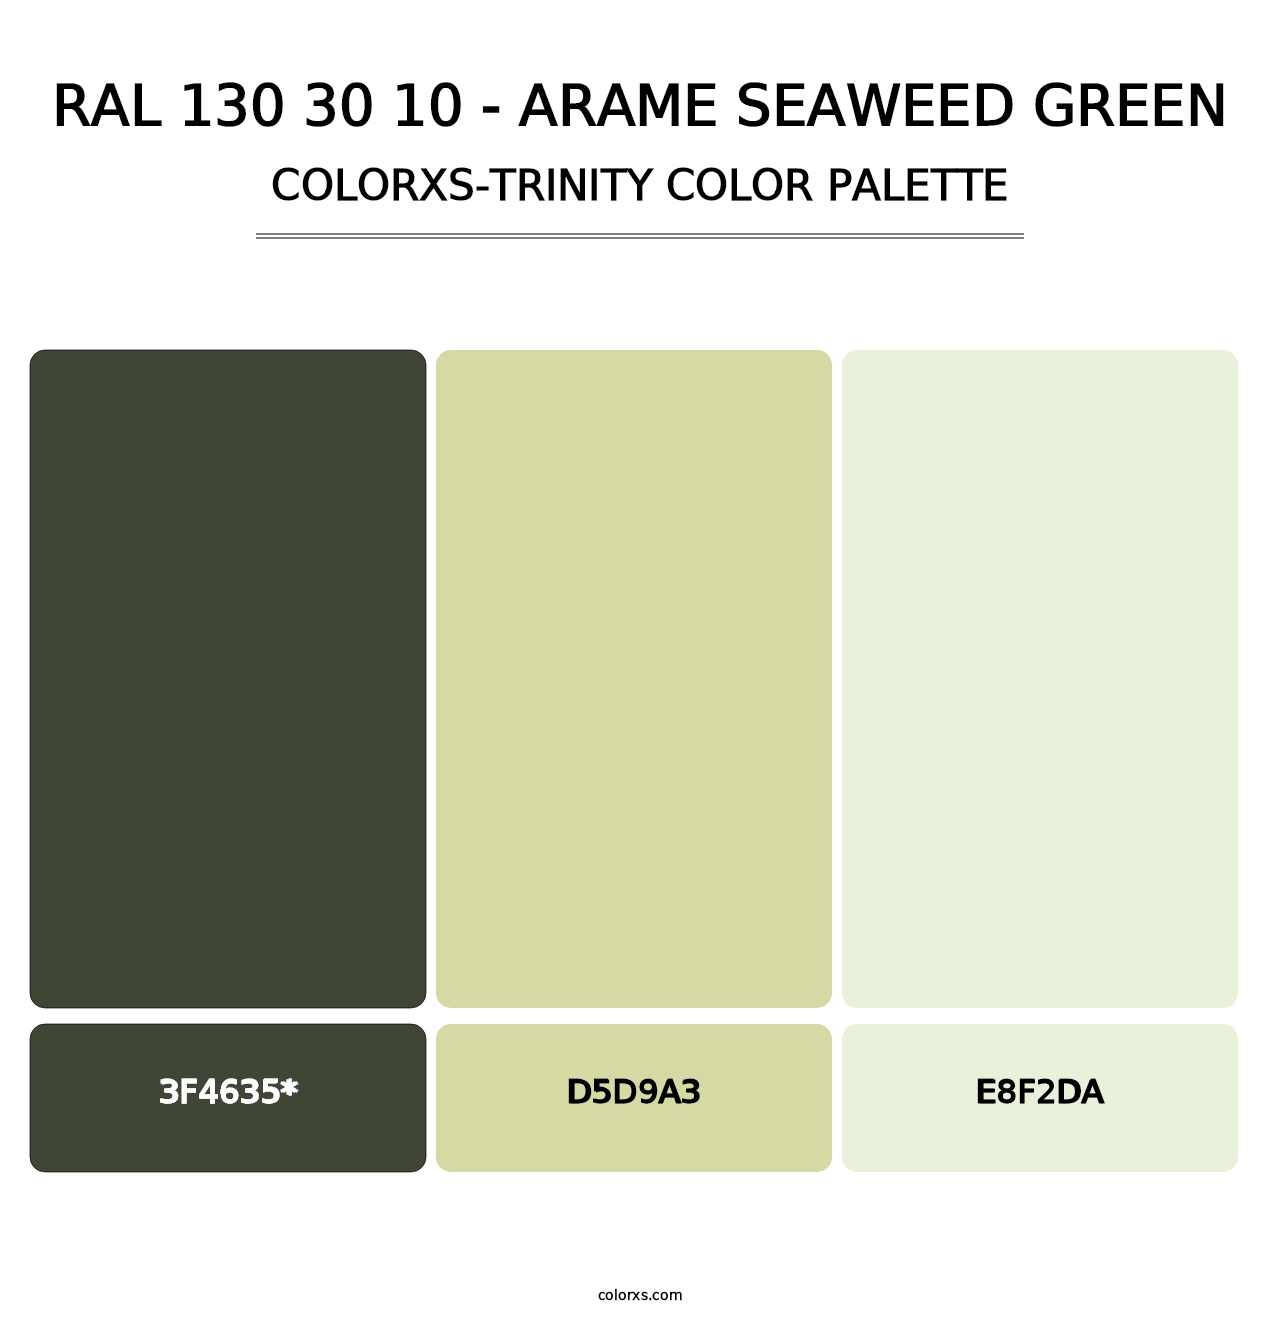 RAL 130 30 10 - Arame Seaweed Green - Colorxs Trinity Palette